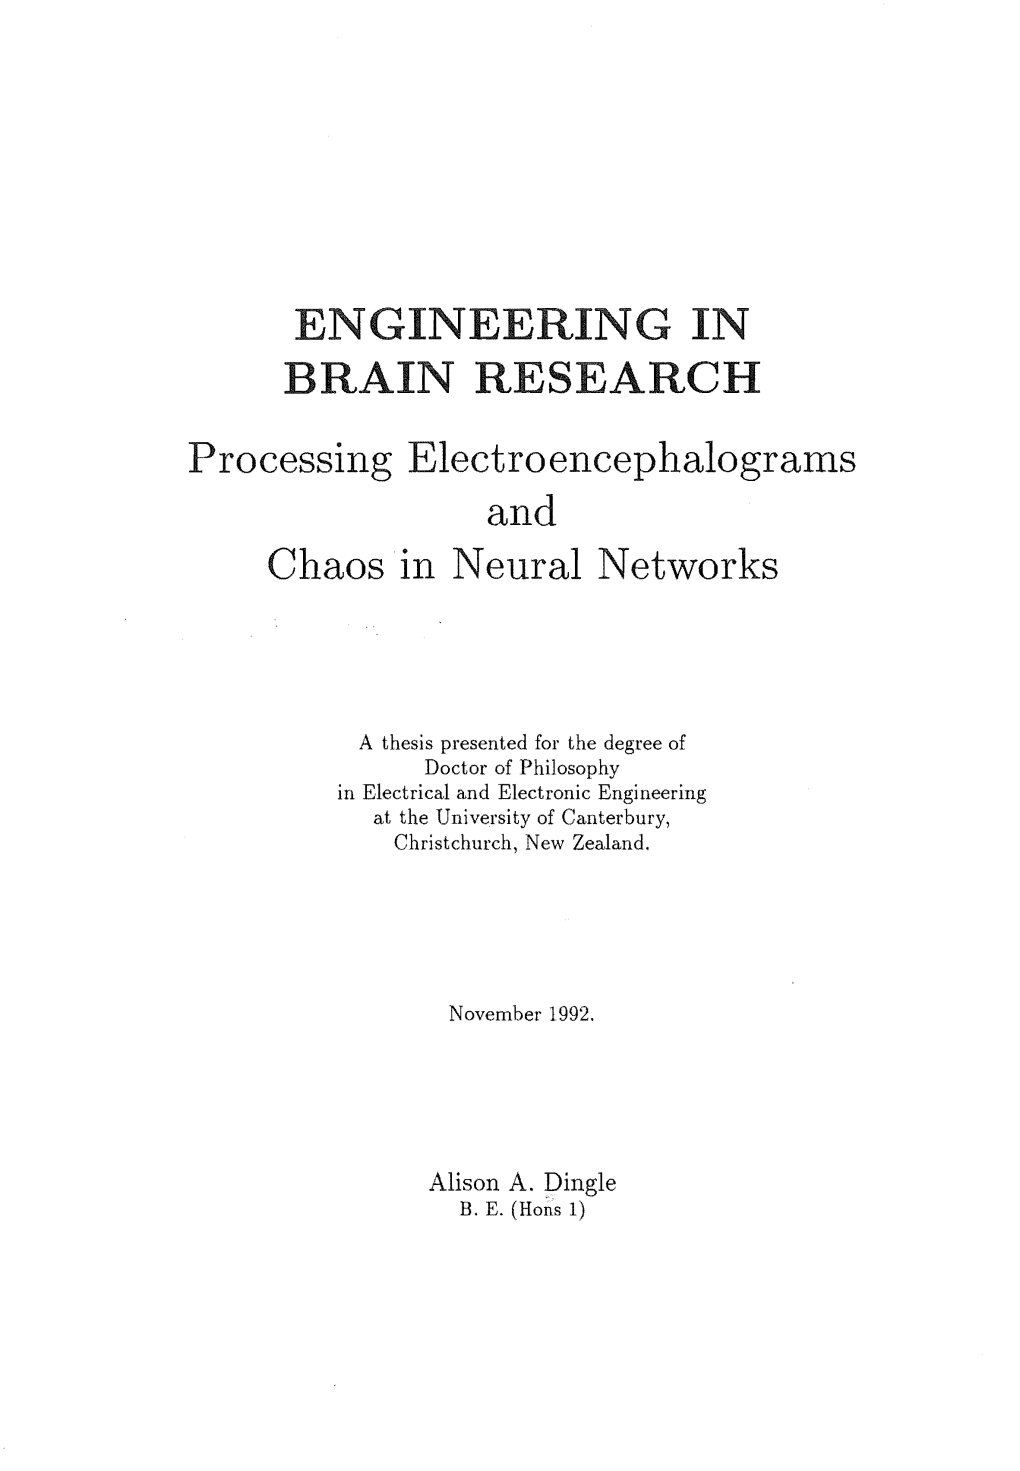 Engineering in Brain Research, from the Development of Instrumentation, to the Analysis of Recorded Signals, to the Modelling of Brain Function